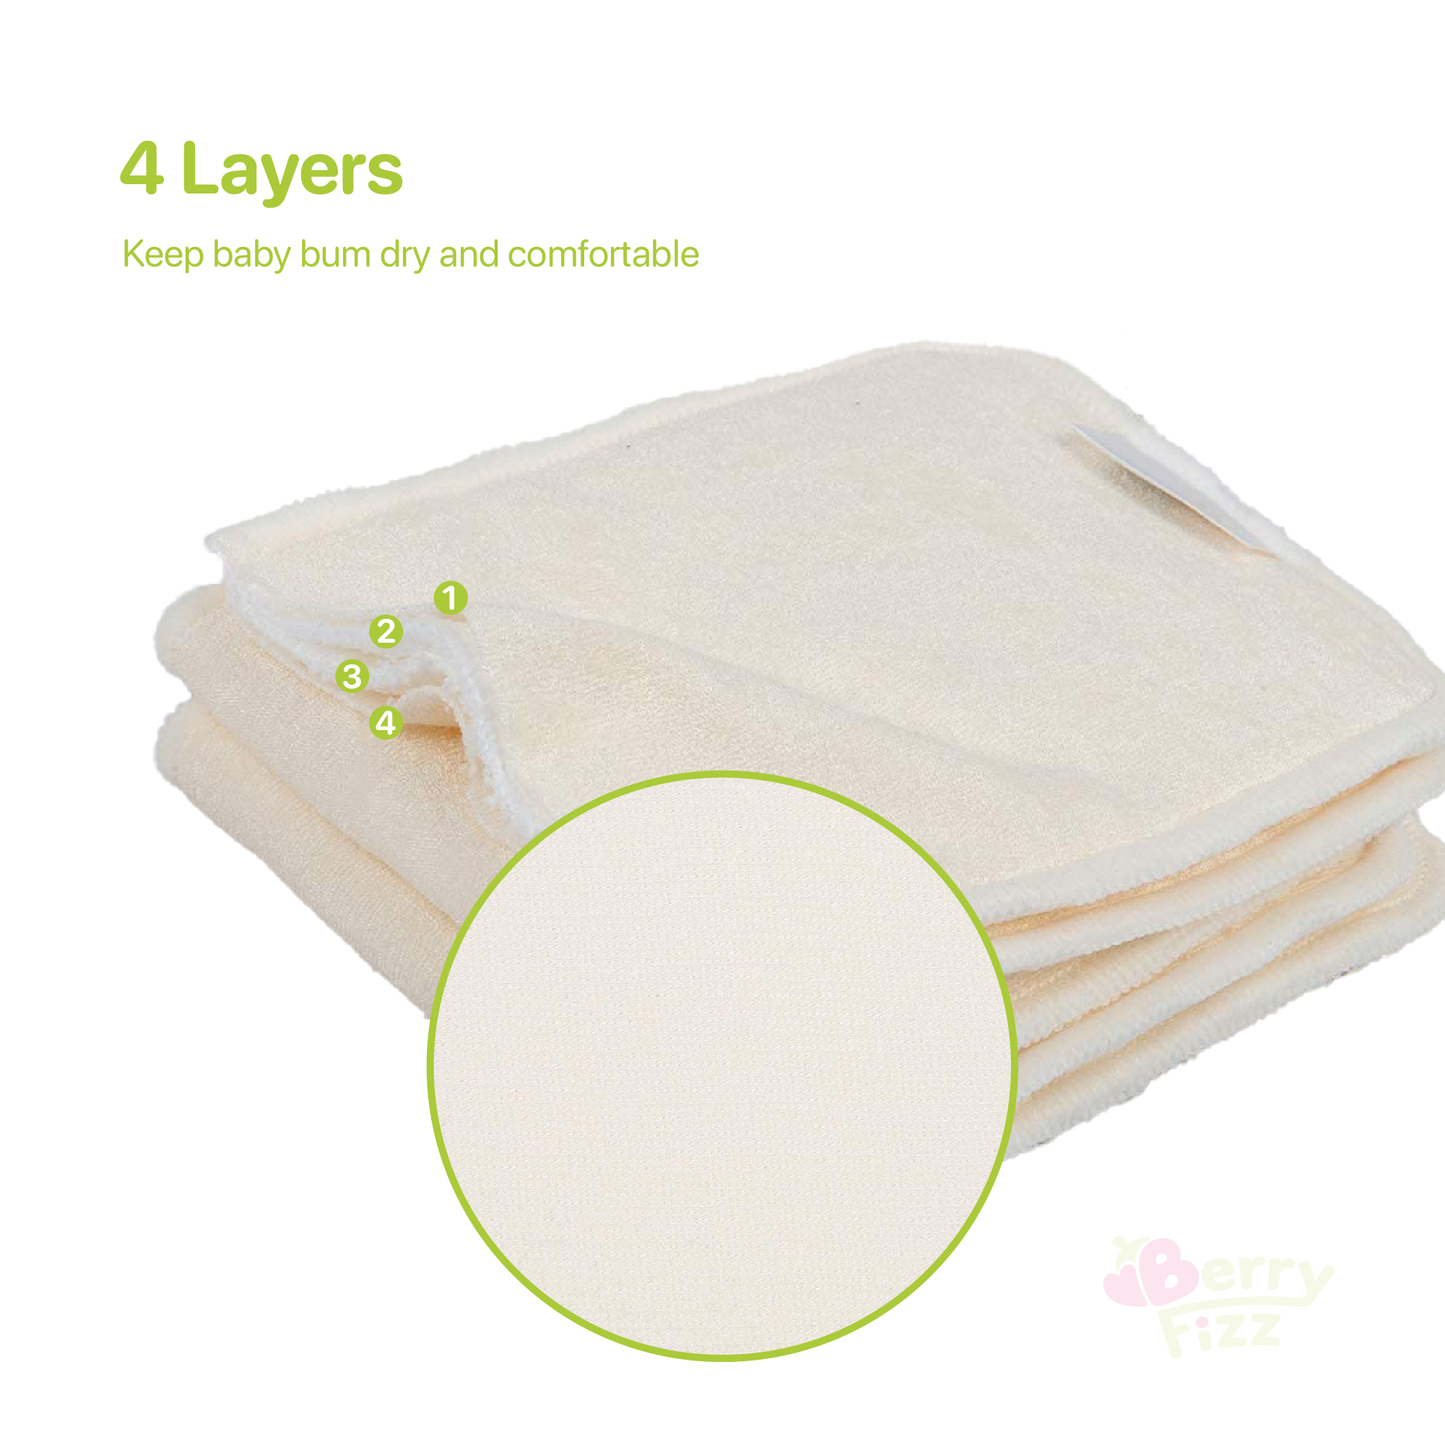 10 Pack Cloth Baby Diaper Inserts Liner 4 Layers Bamboo Cotton Reusable Super Absorbent for Newborn